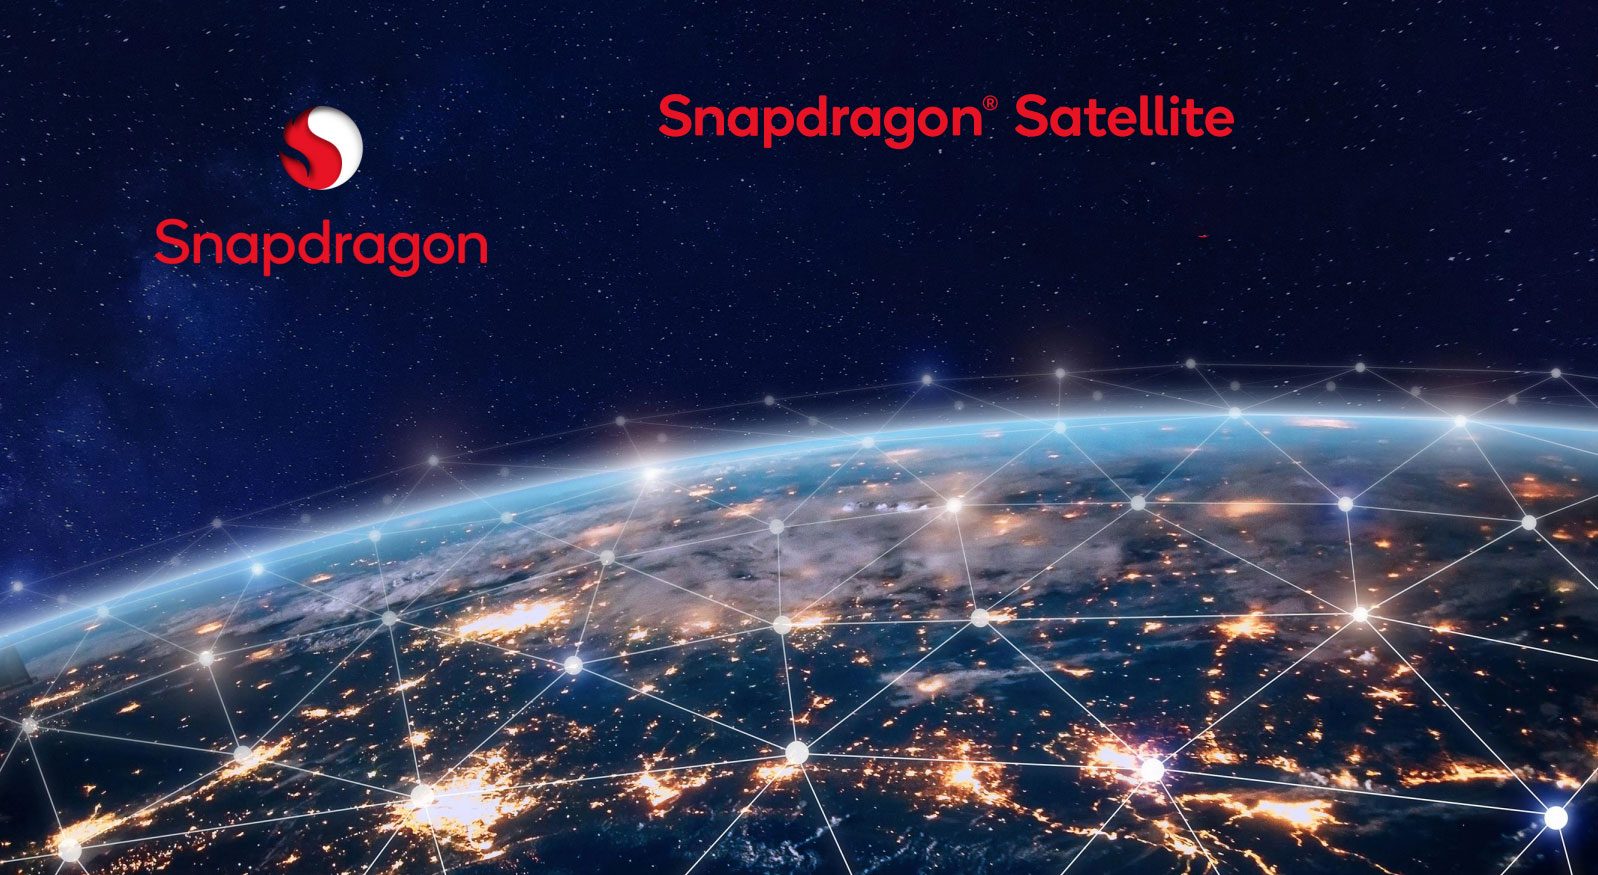 Space battle: Snapdragon Satellite to fight Apple's Emergency SOS | NextPit